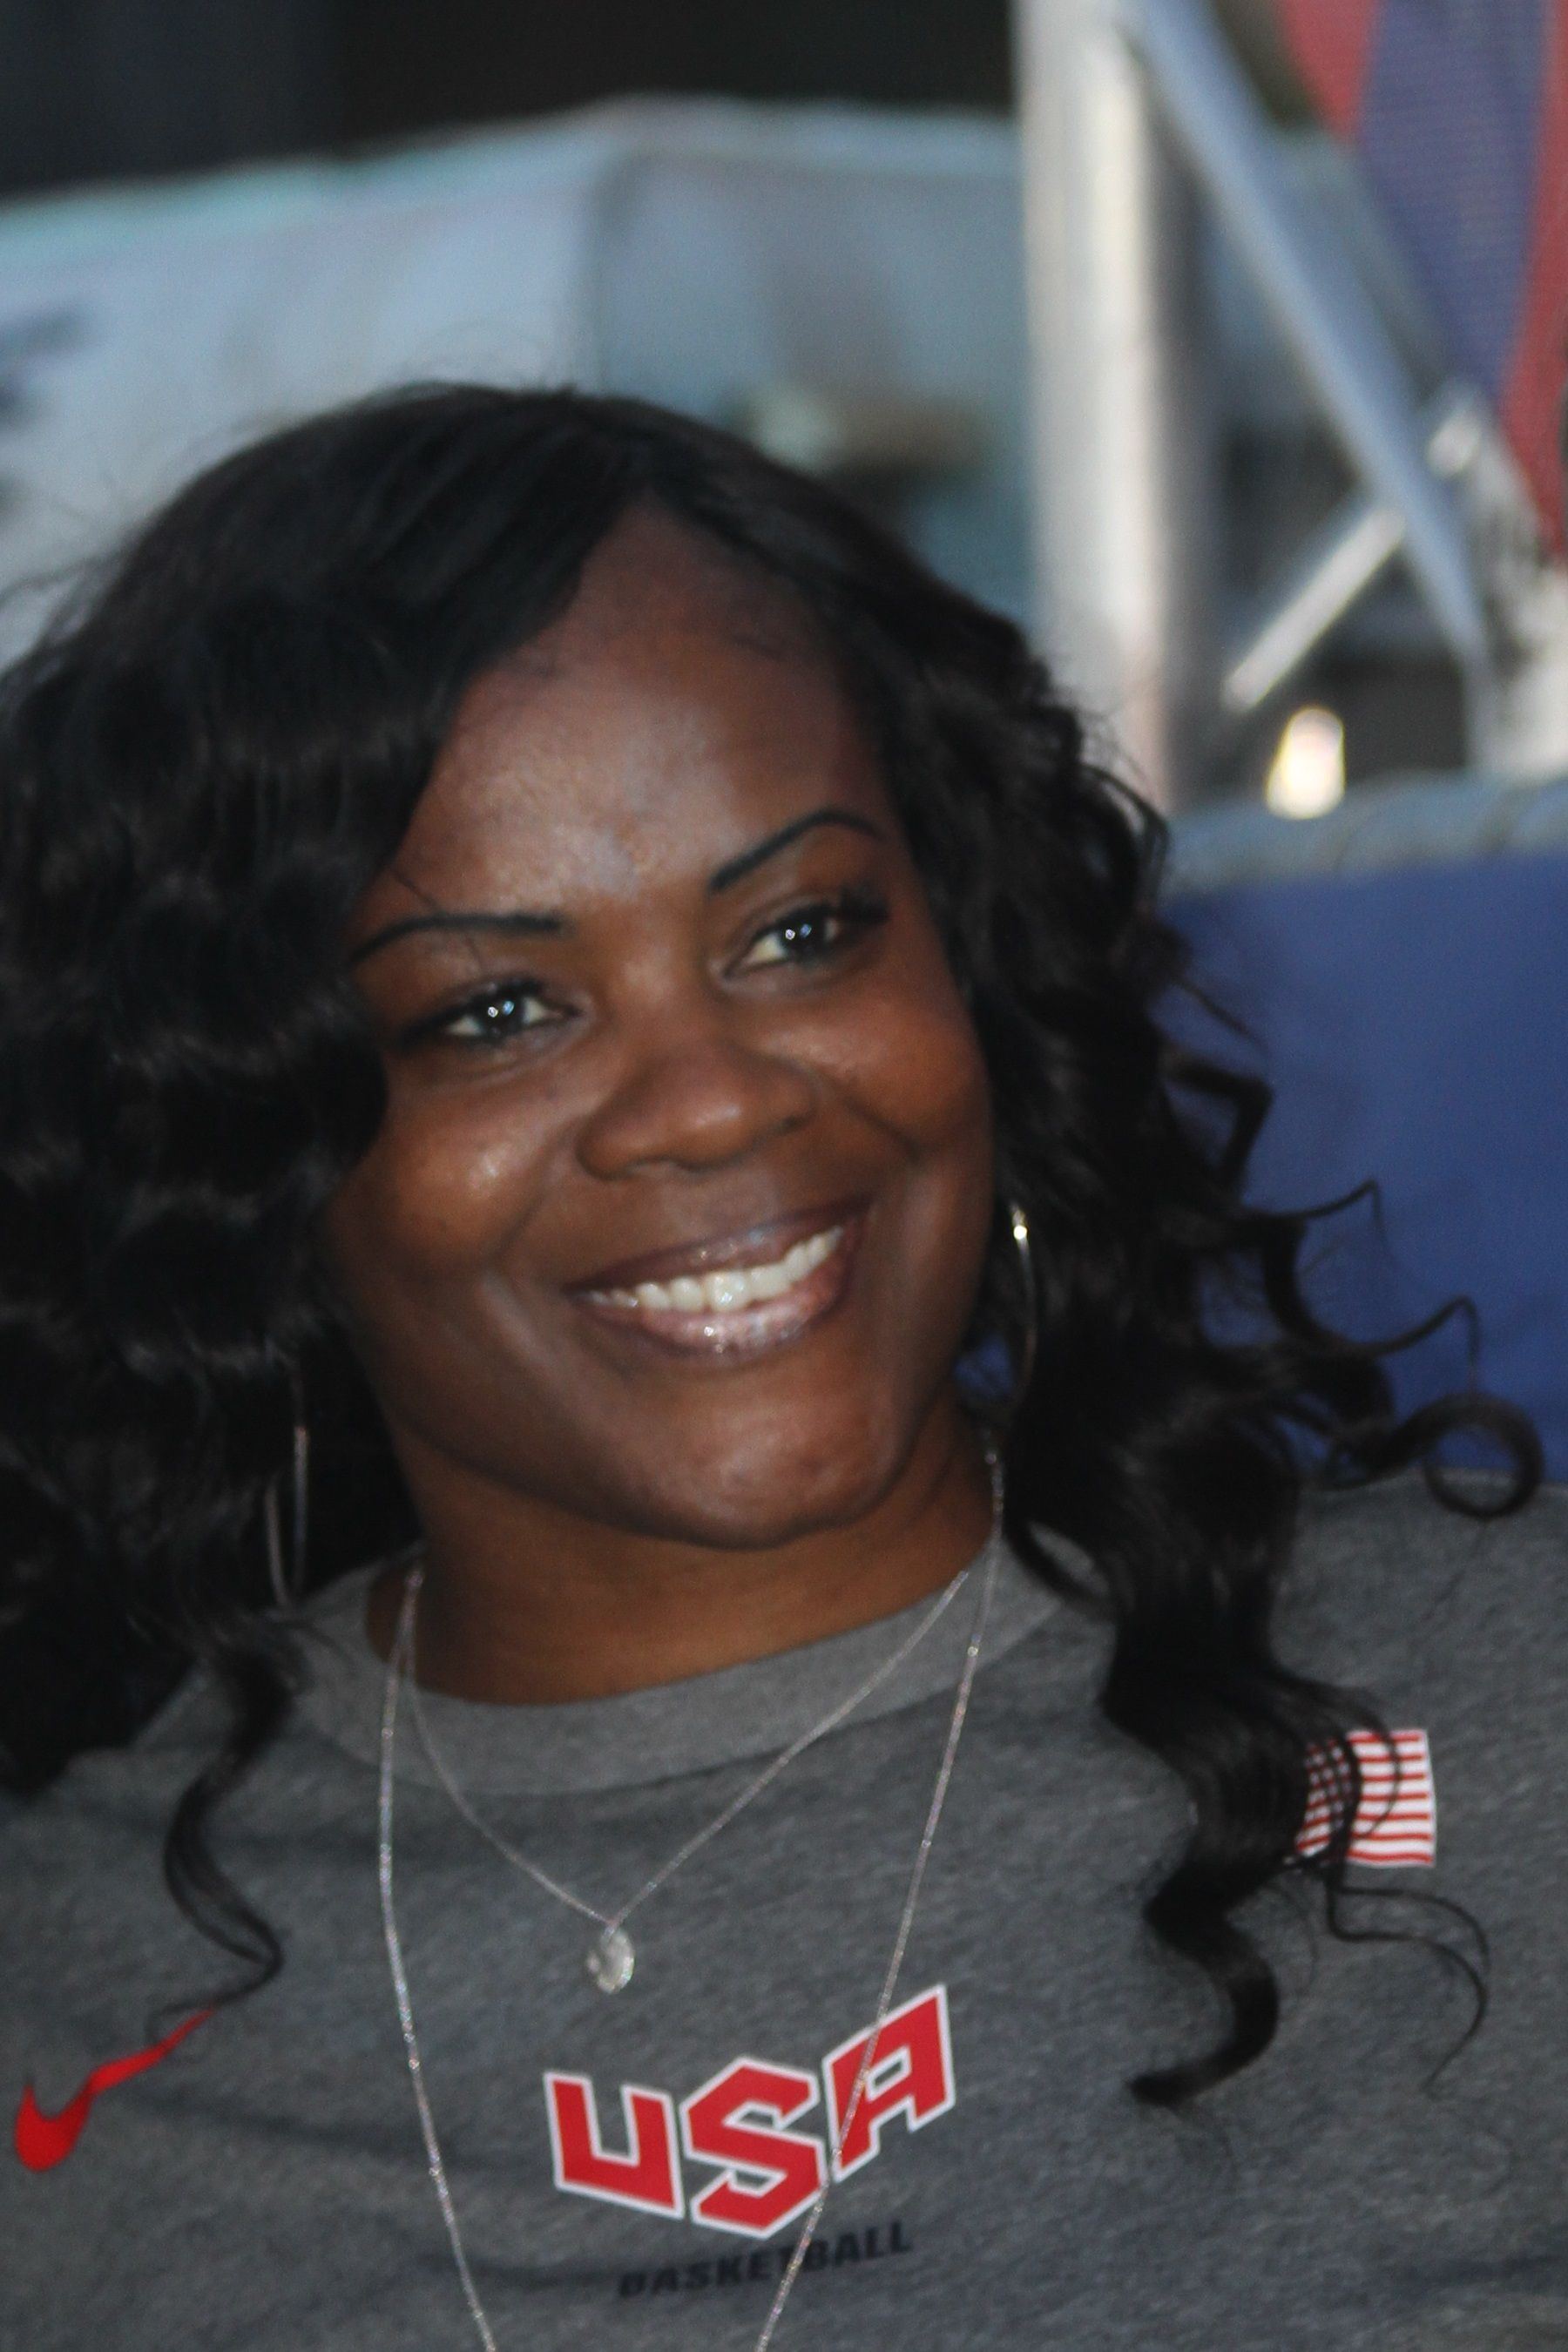 Guard reccomend Sheryl swoopes being gay